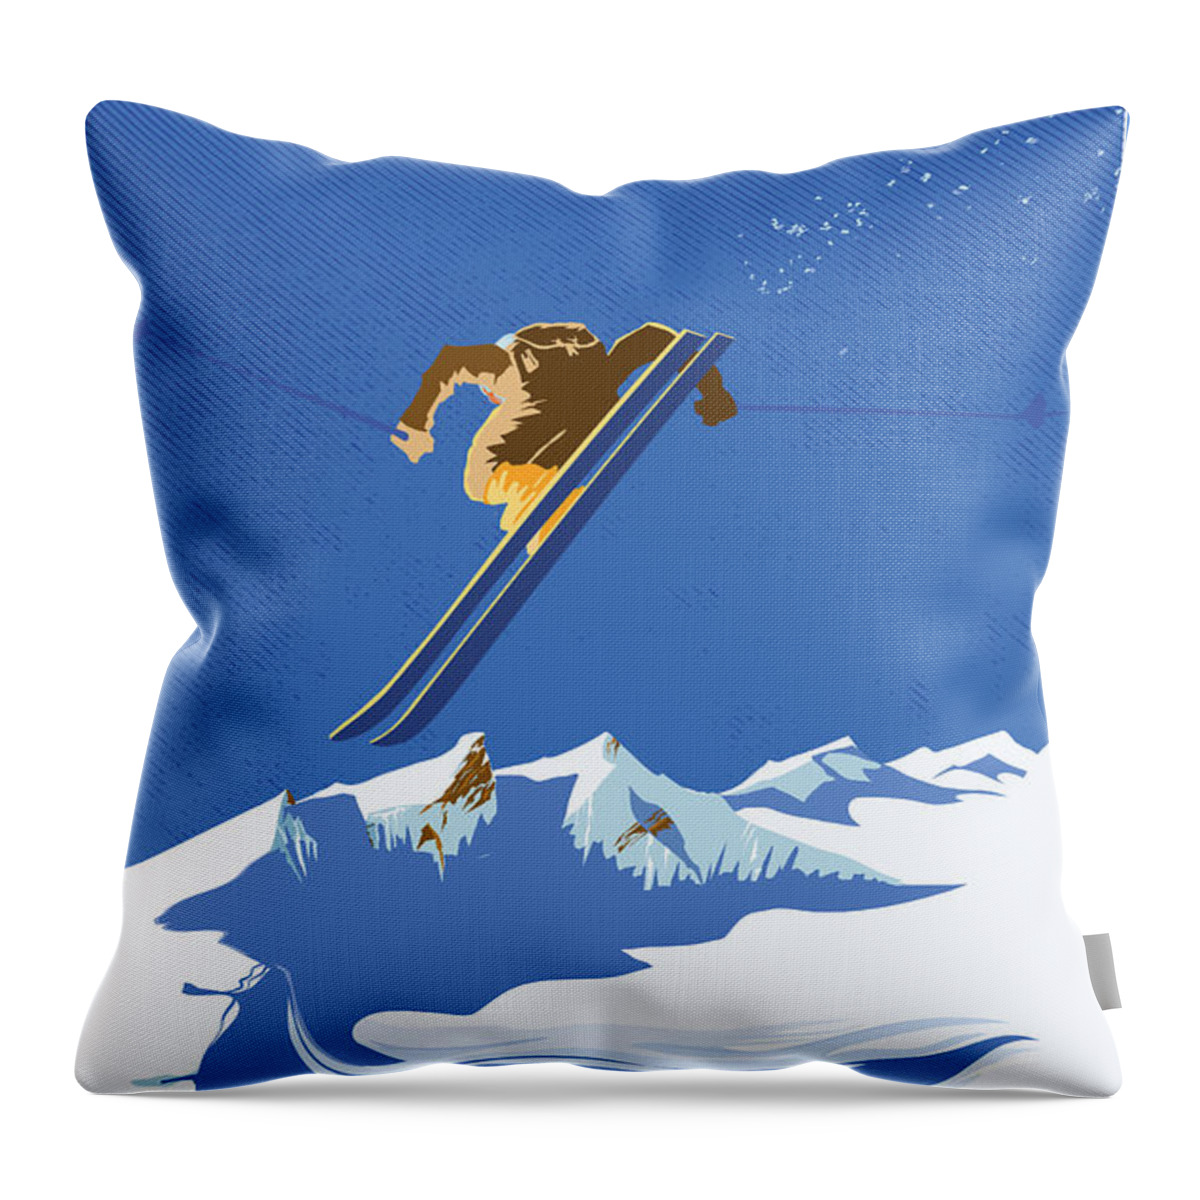 Ski Throw Pillow featuring the painting Sky Skier by Sassan Filsoof